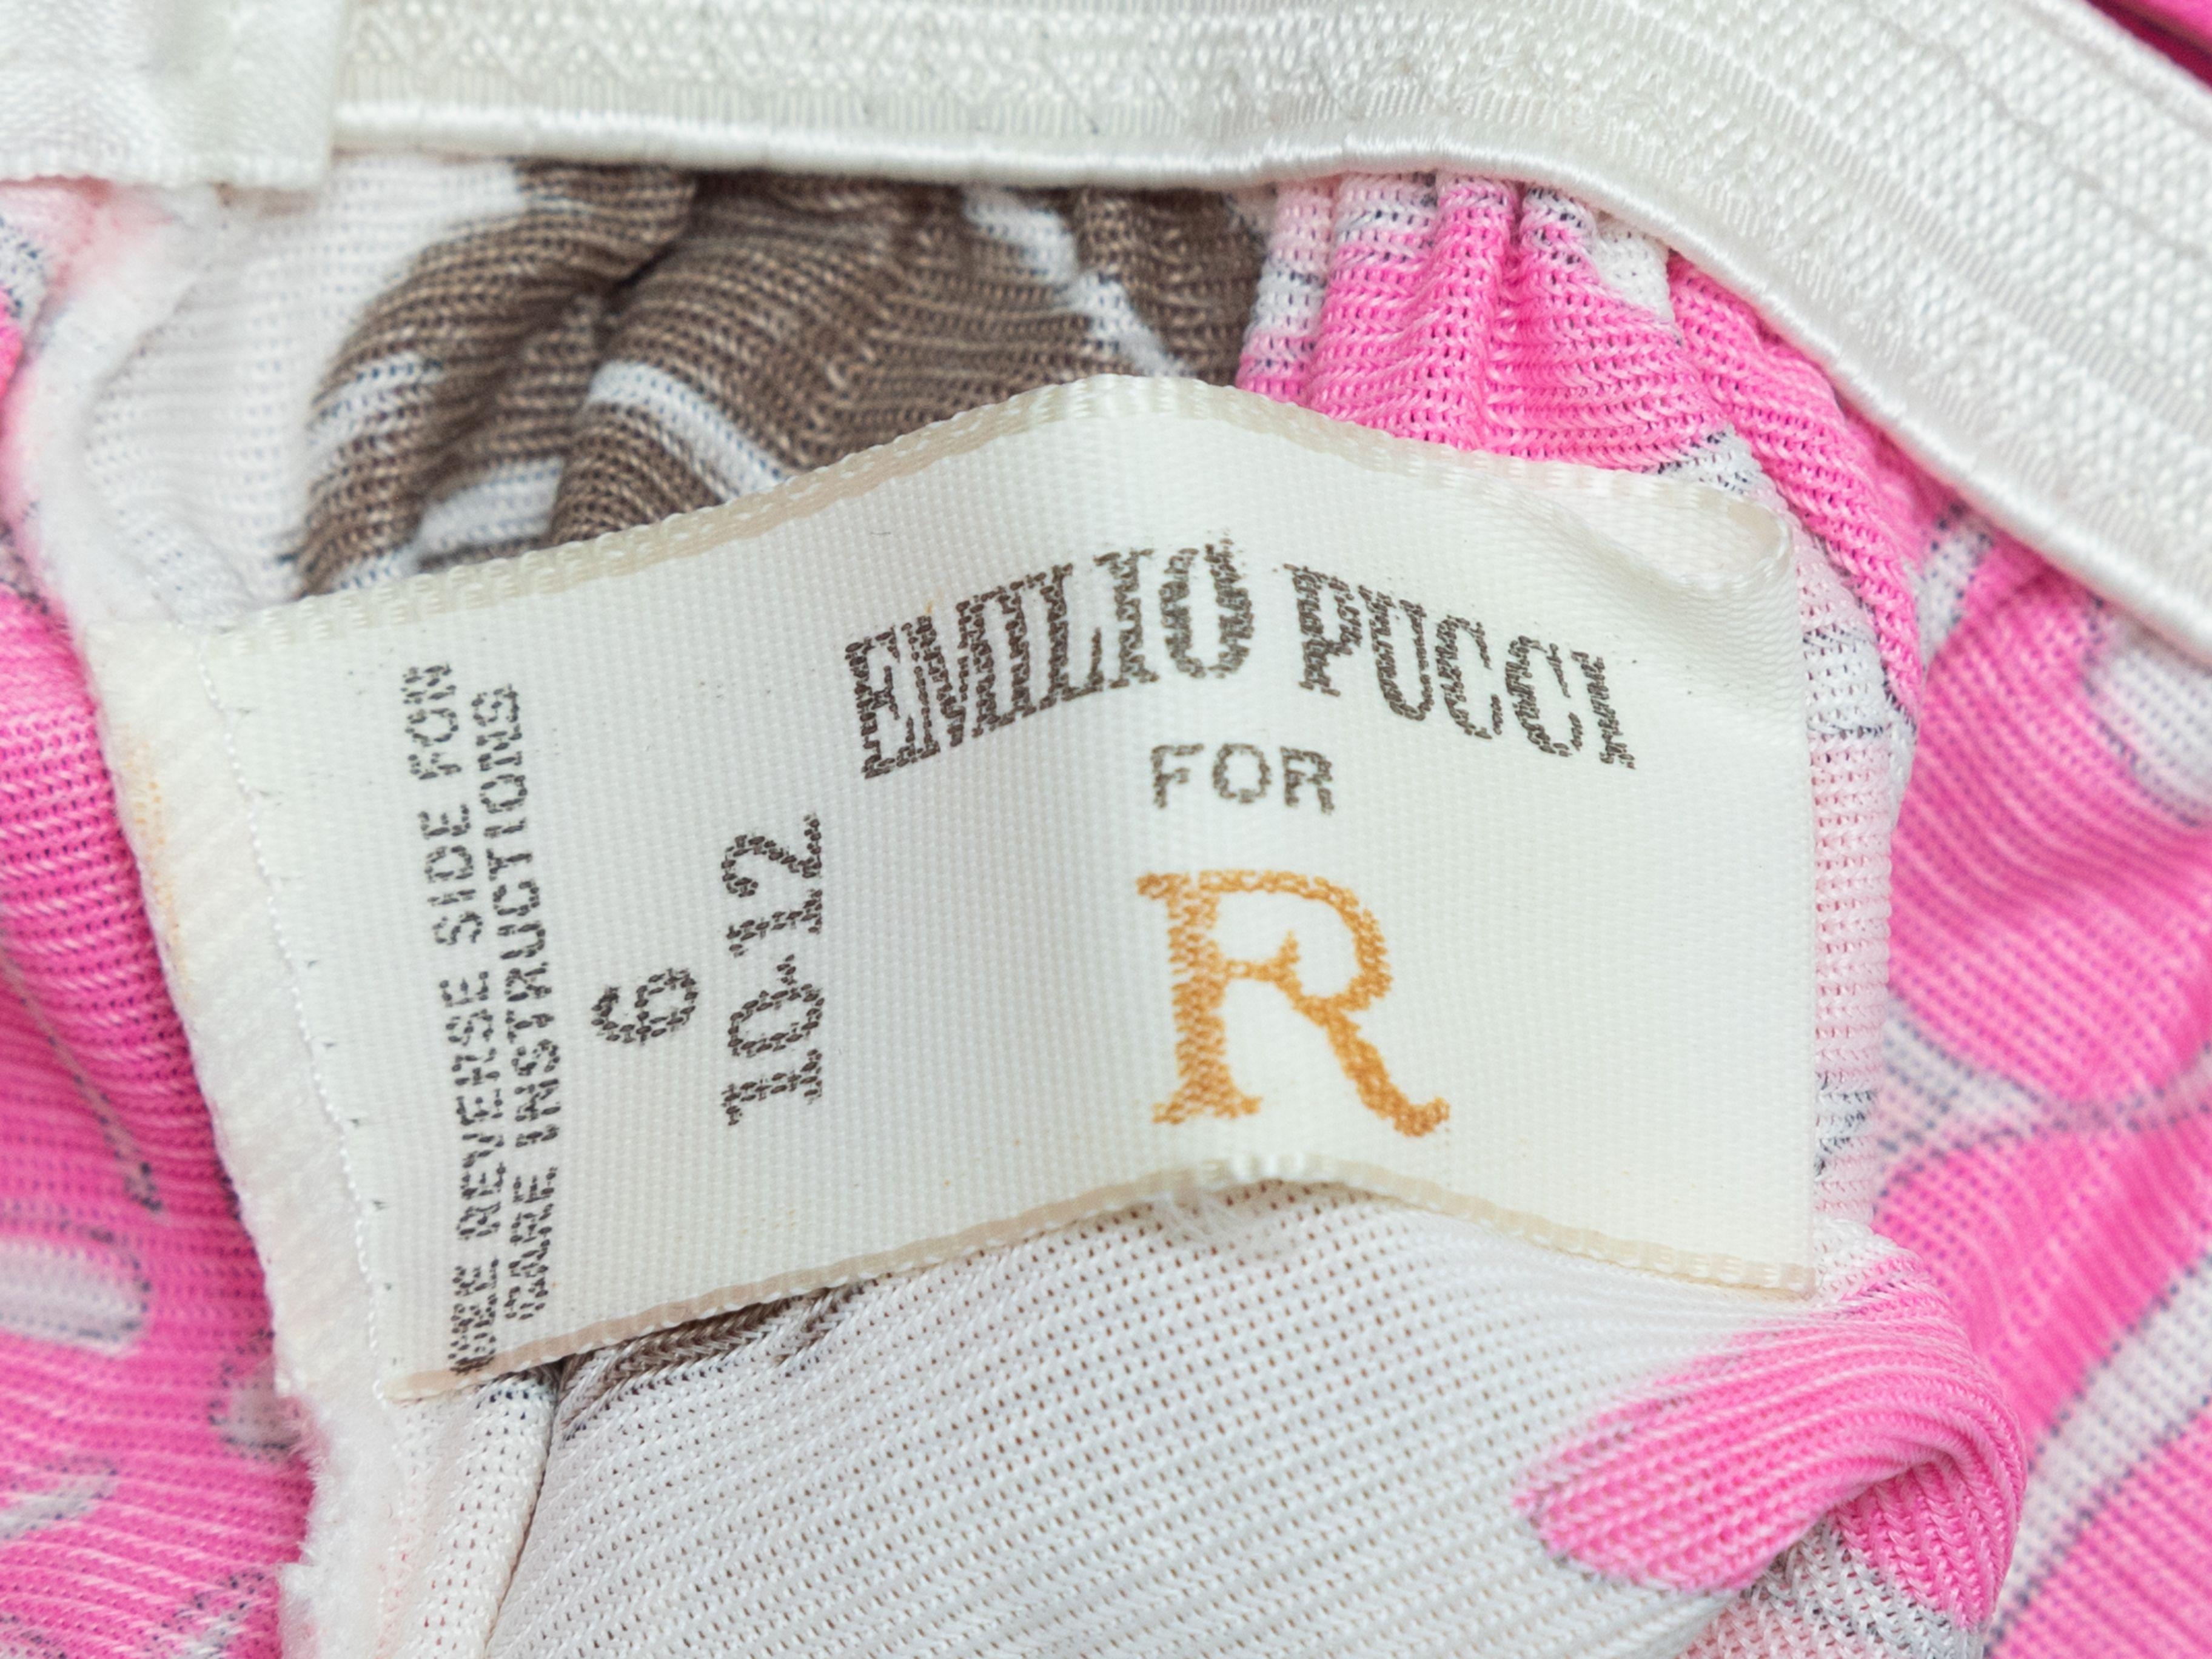 Product Details: Vintage pink and multicolor floral print briefs by Emilio Pucci for Formfit Rogers. Elasticized waistband and leg openings. 25